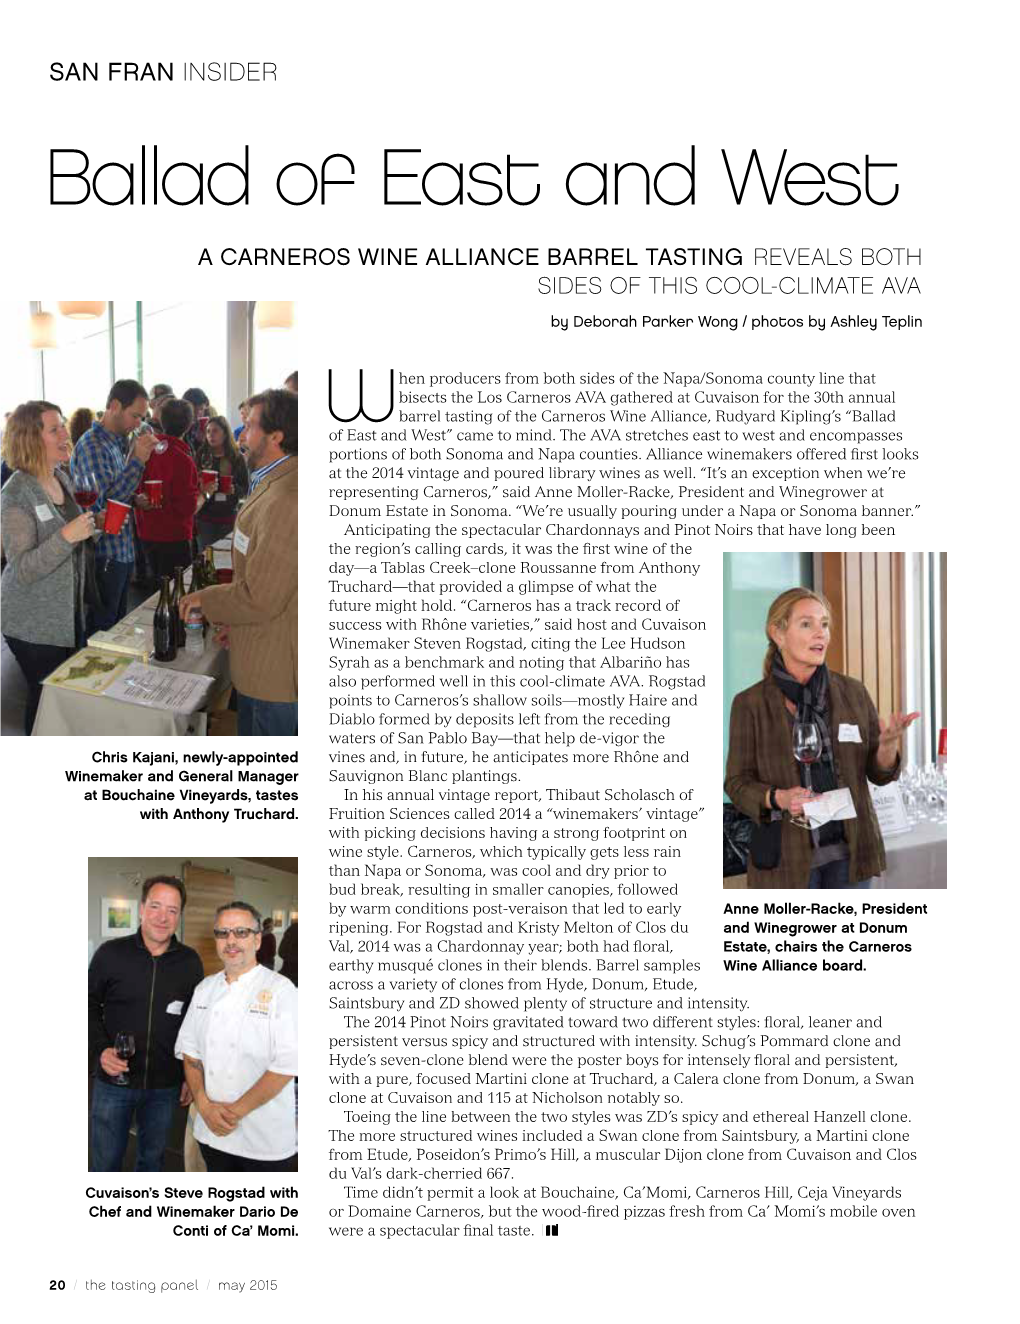 Ballad of East and West a CARNEROS WINE ALLIANCE BARREL TASTING REVEALS BOTH SIDES of THIS COOL-CLIMATE AVA